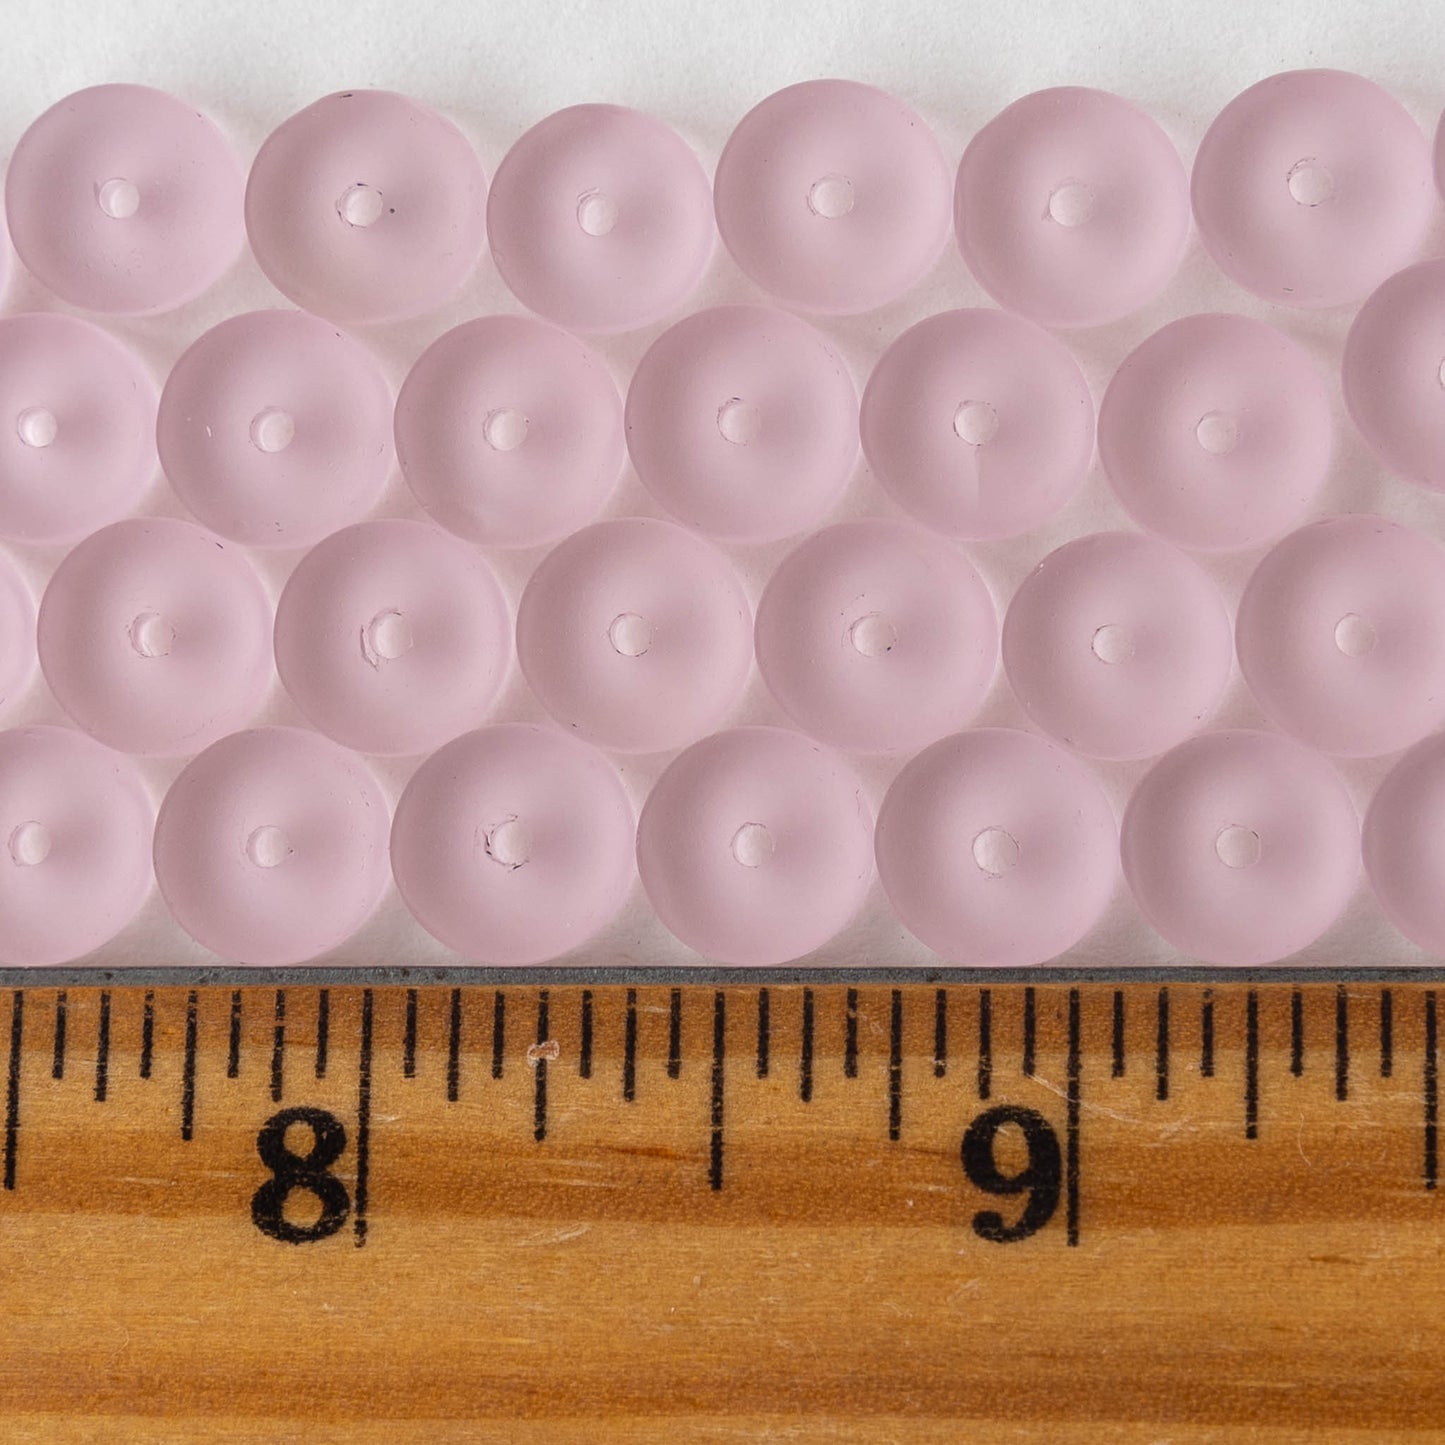 9mm Frosted Glass Heishi Beads - Pink - 72 Beads